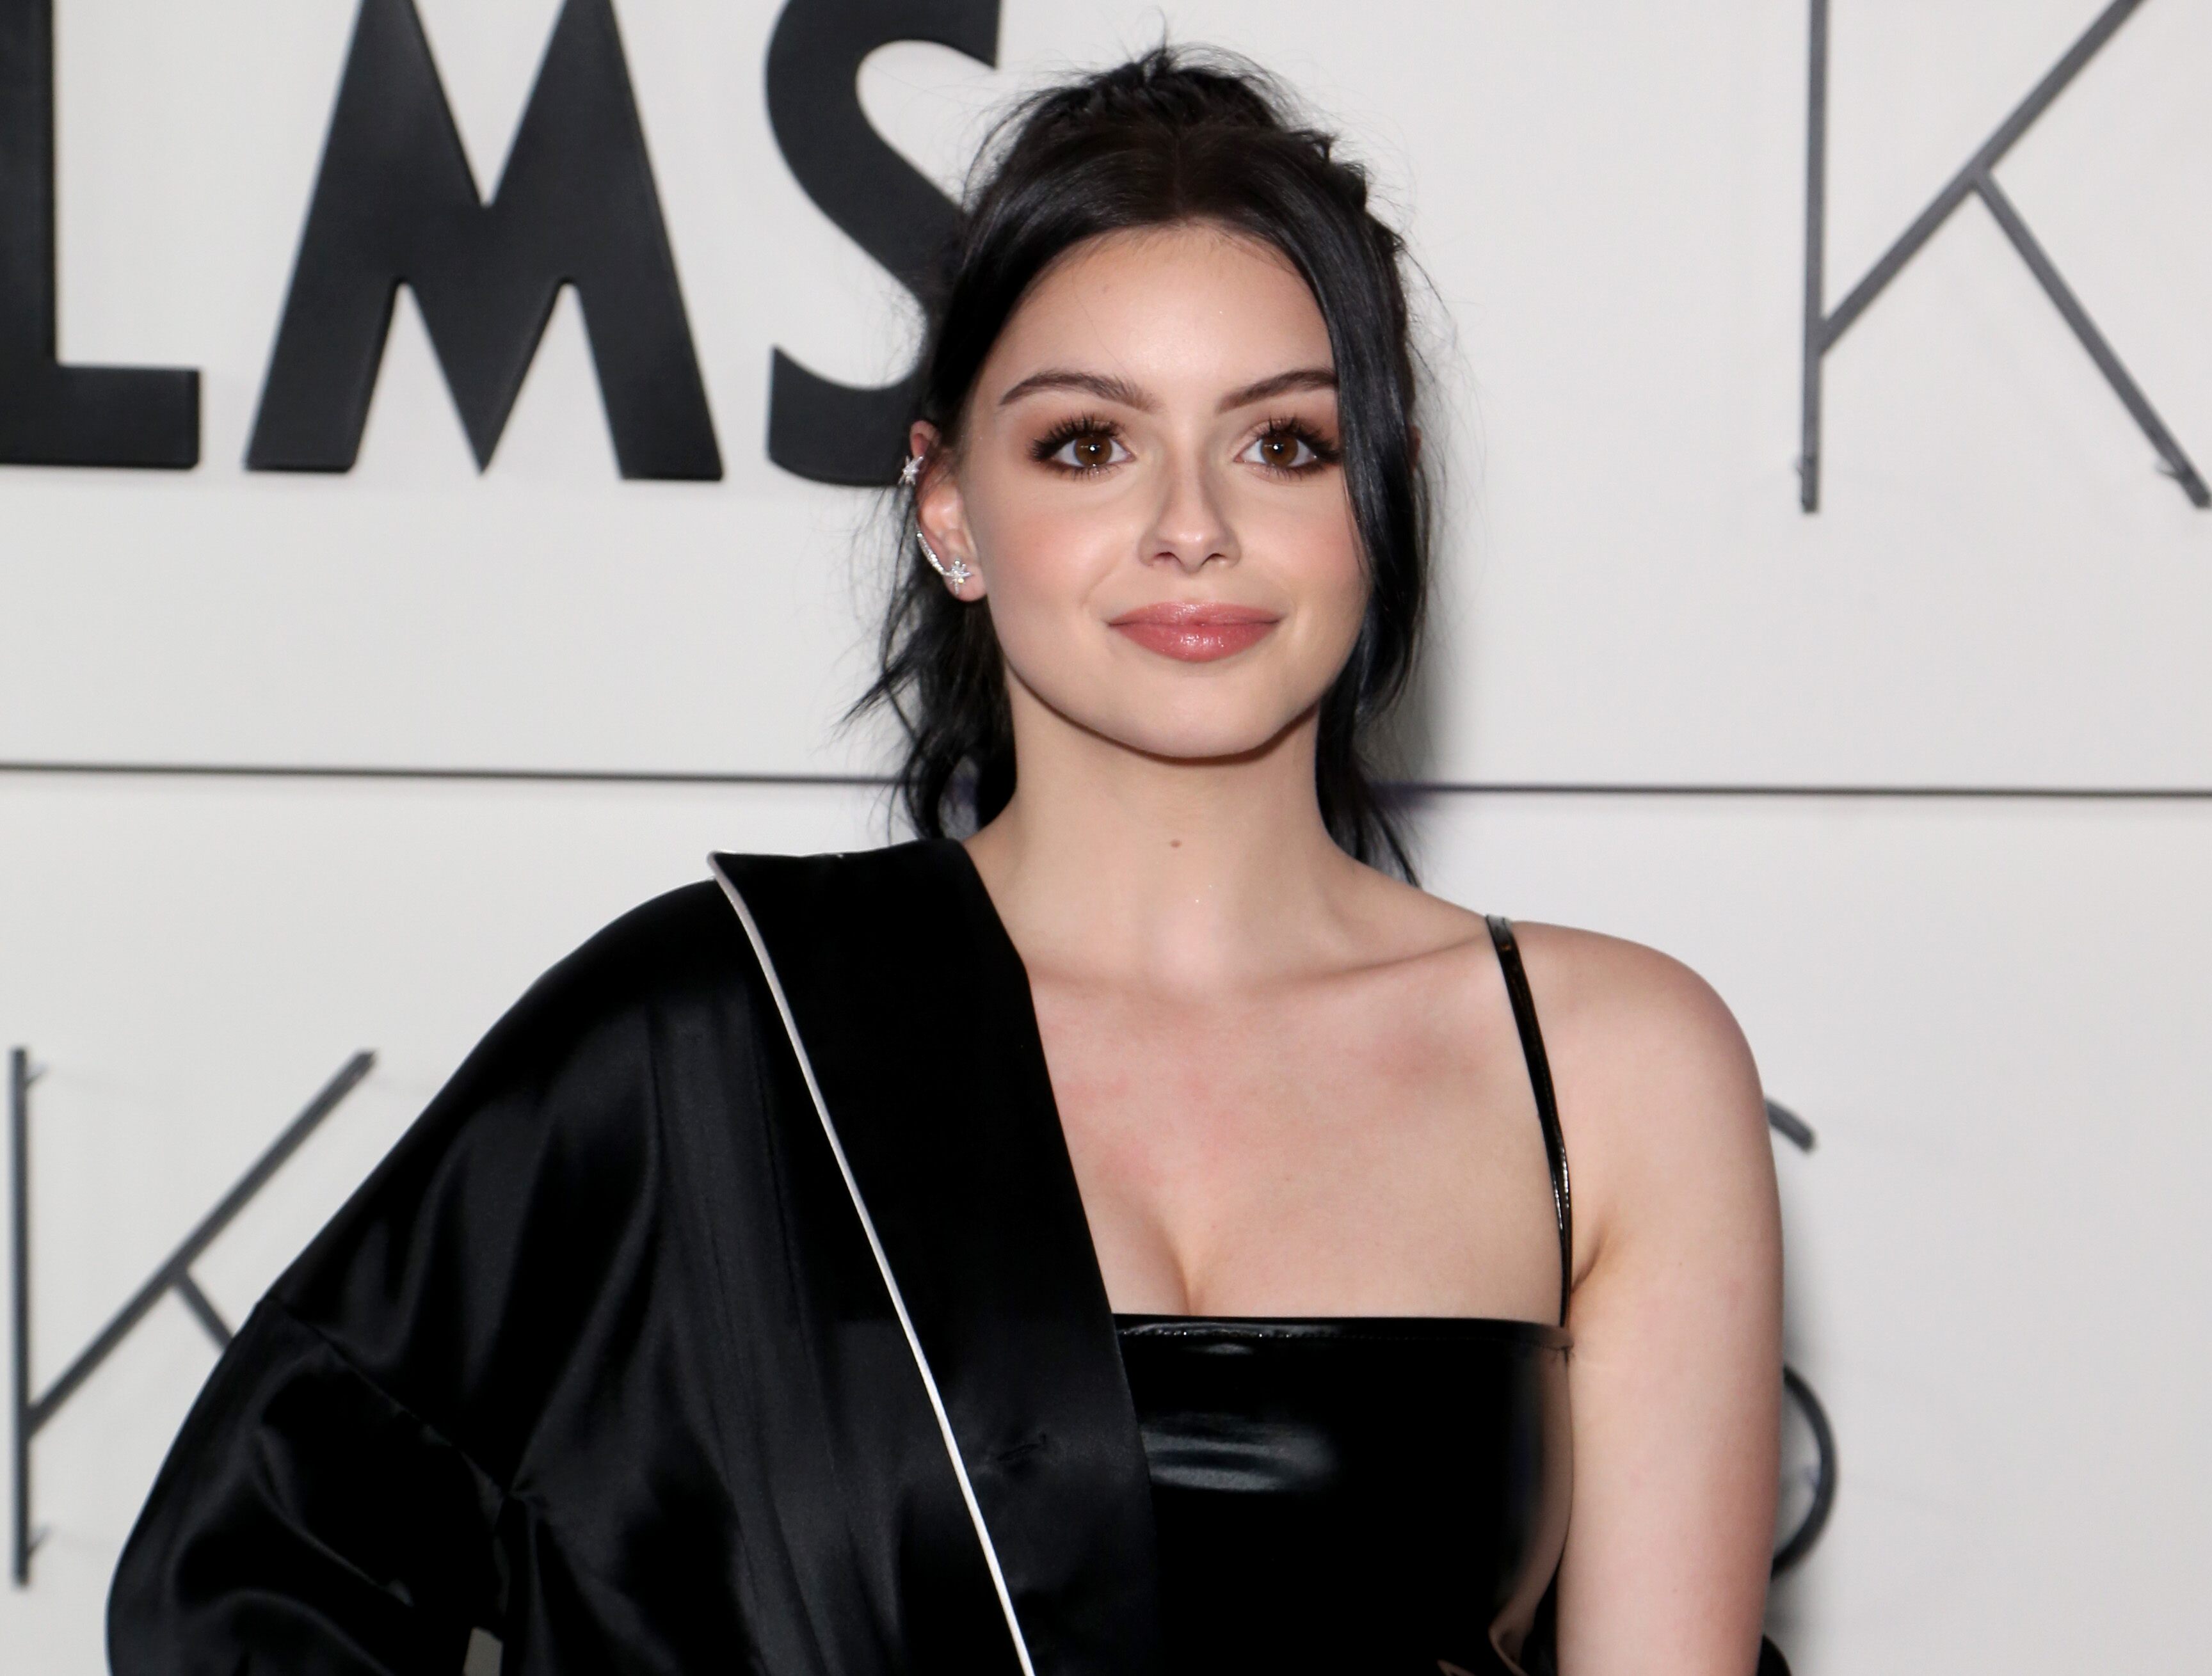 Ariel Winter says being as cute as Baby Yoda is 'unobtainable' after posting crop top selfies - www.foxnews.com